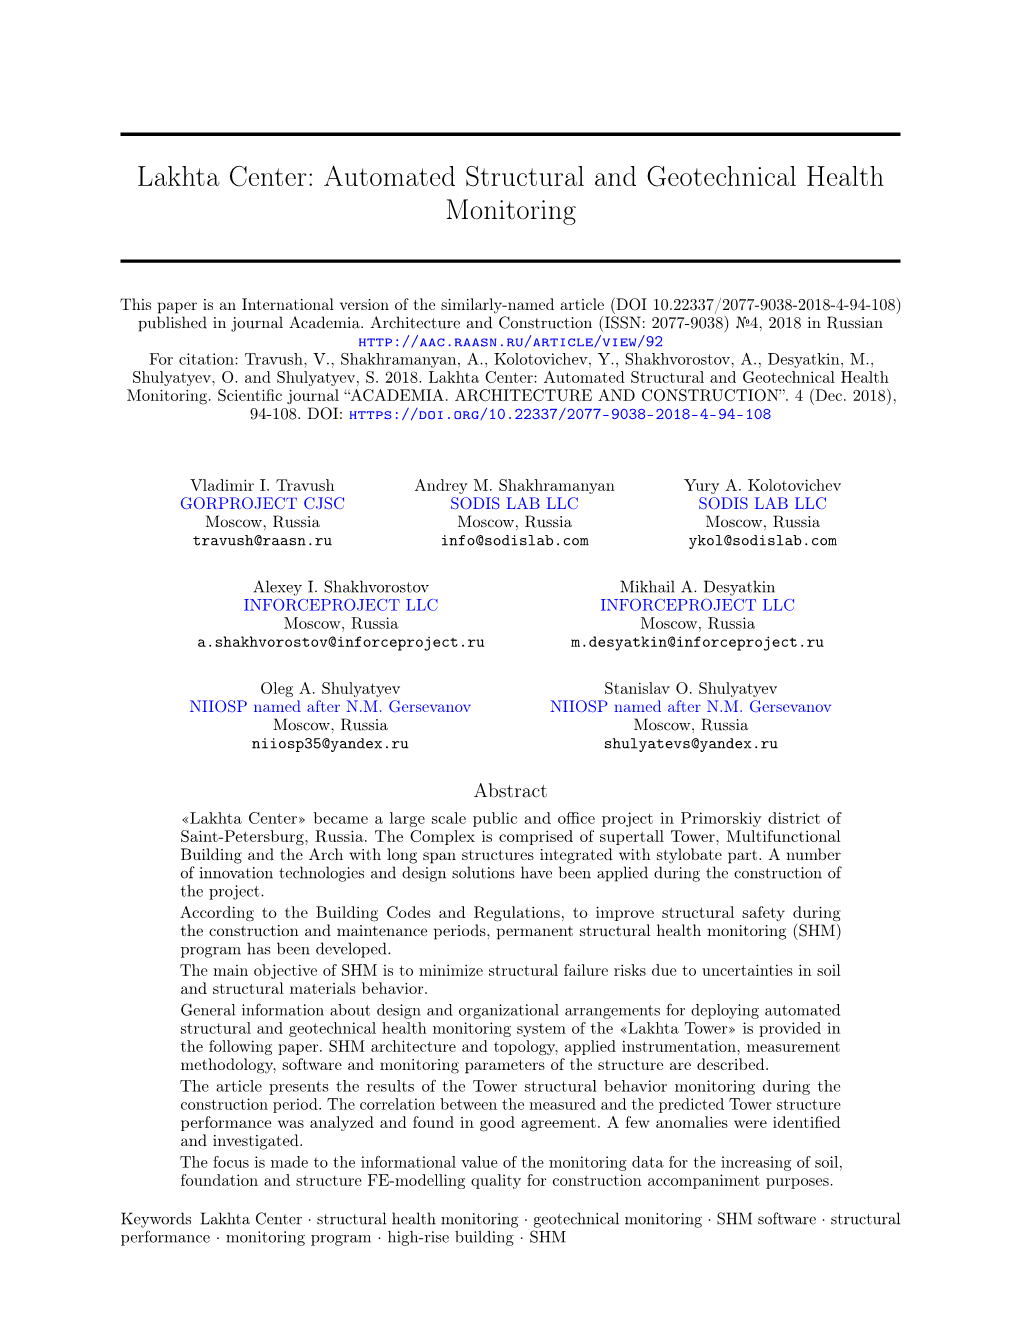 Lakhta Center: Automated Structural and Geotechnical Health Monitoring